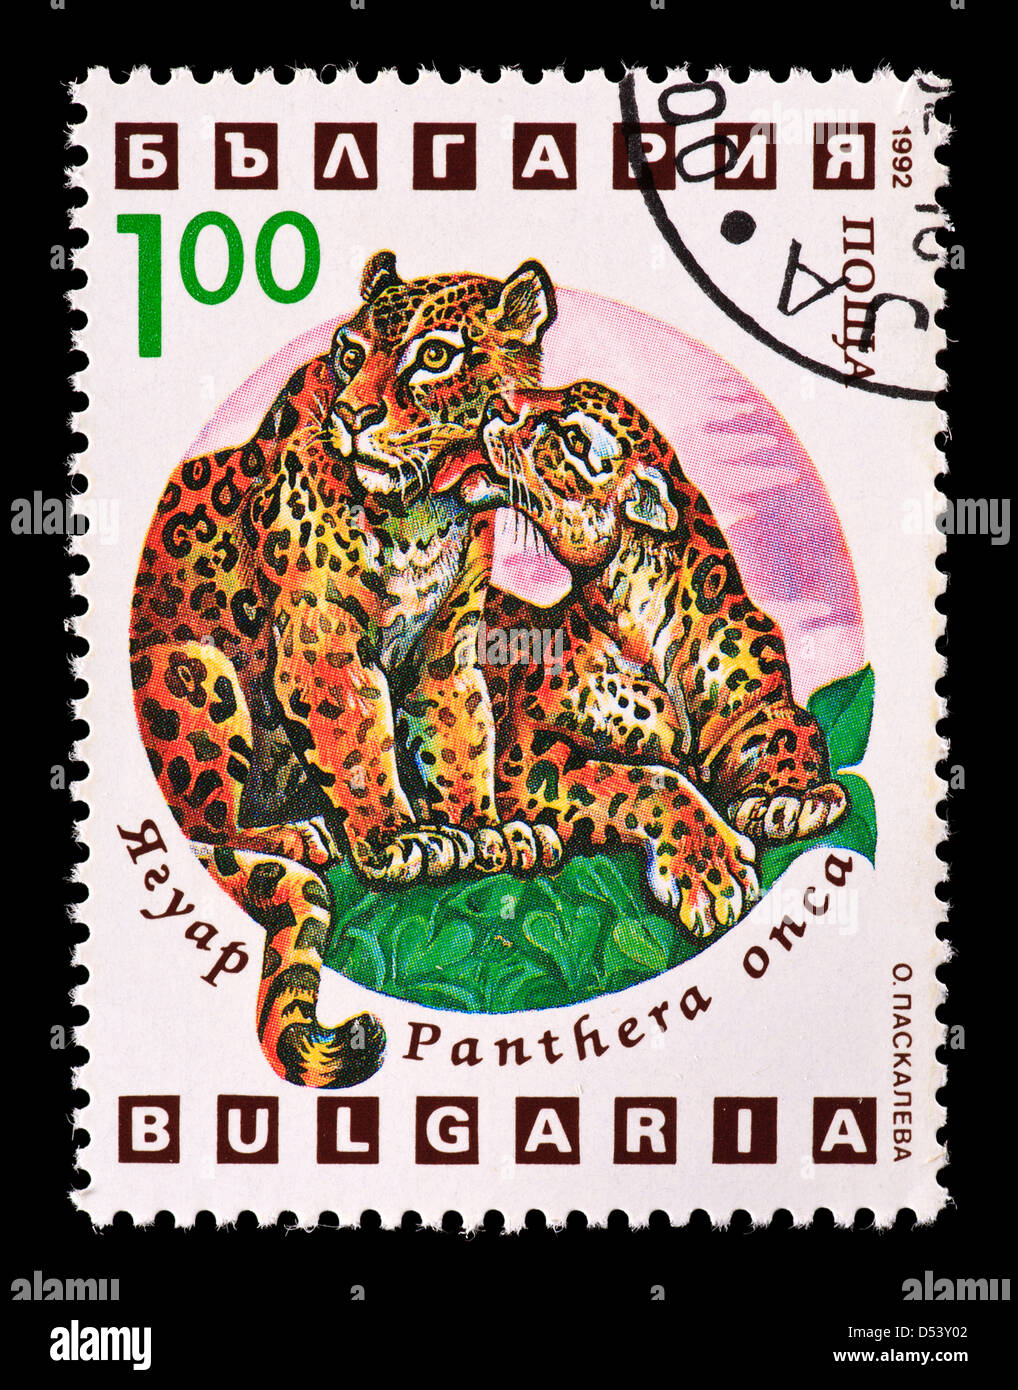 Postage stamp from Bulgaria depicting a jaguar mother with young (Panthera onca) Stock Photo